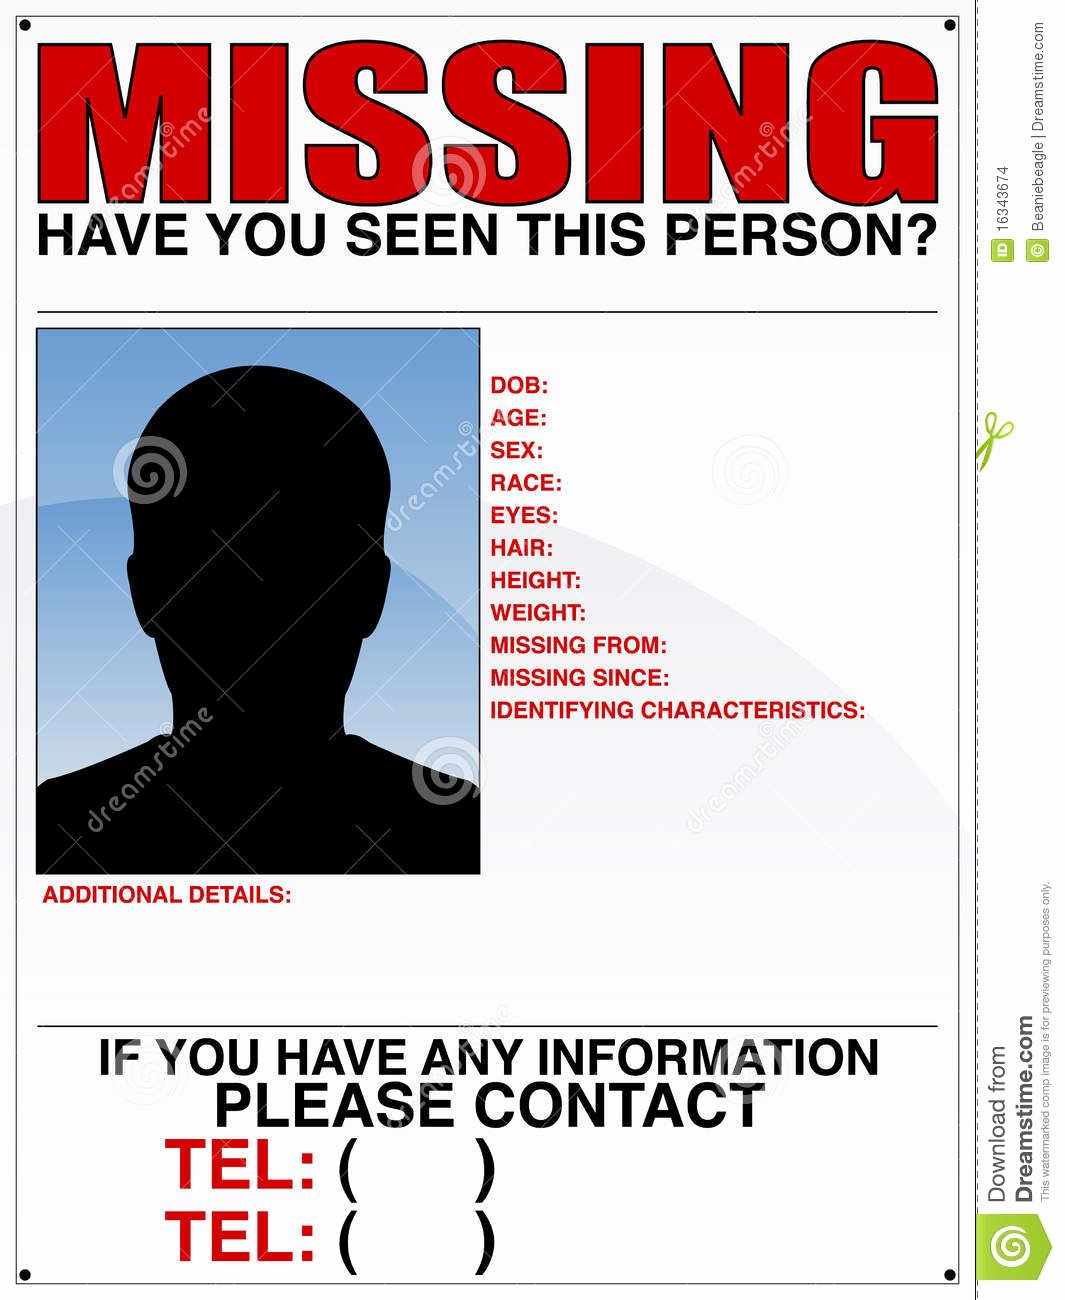 Missing Person Poster Template Unique Missing Person Poster Stock Image